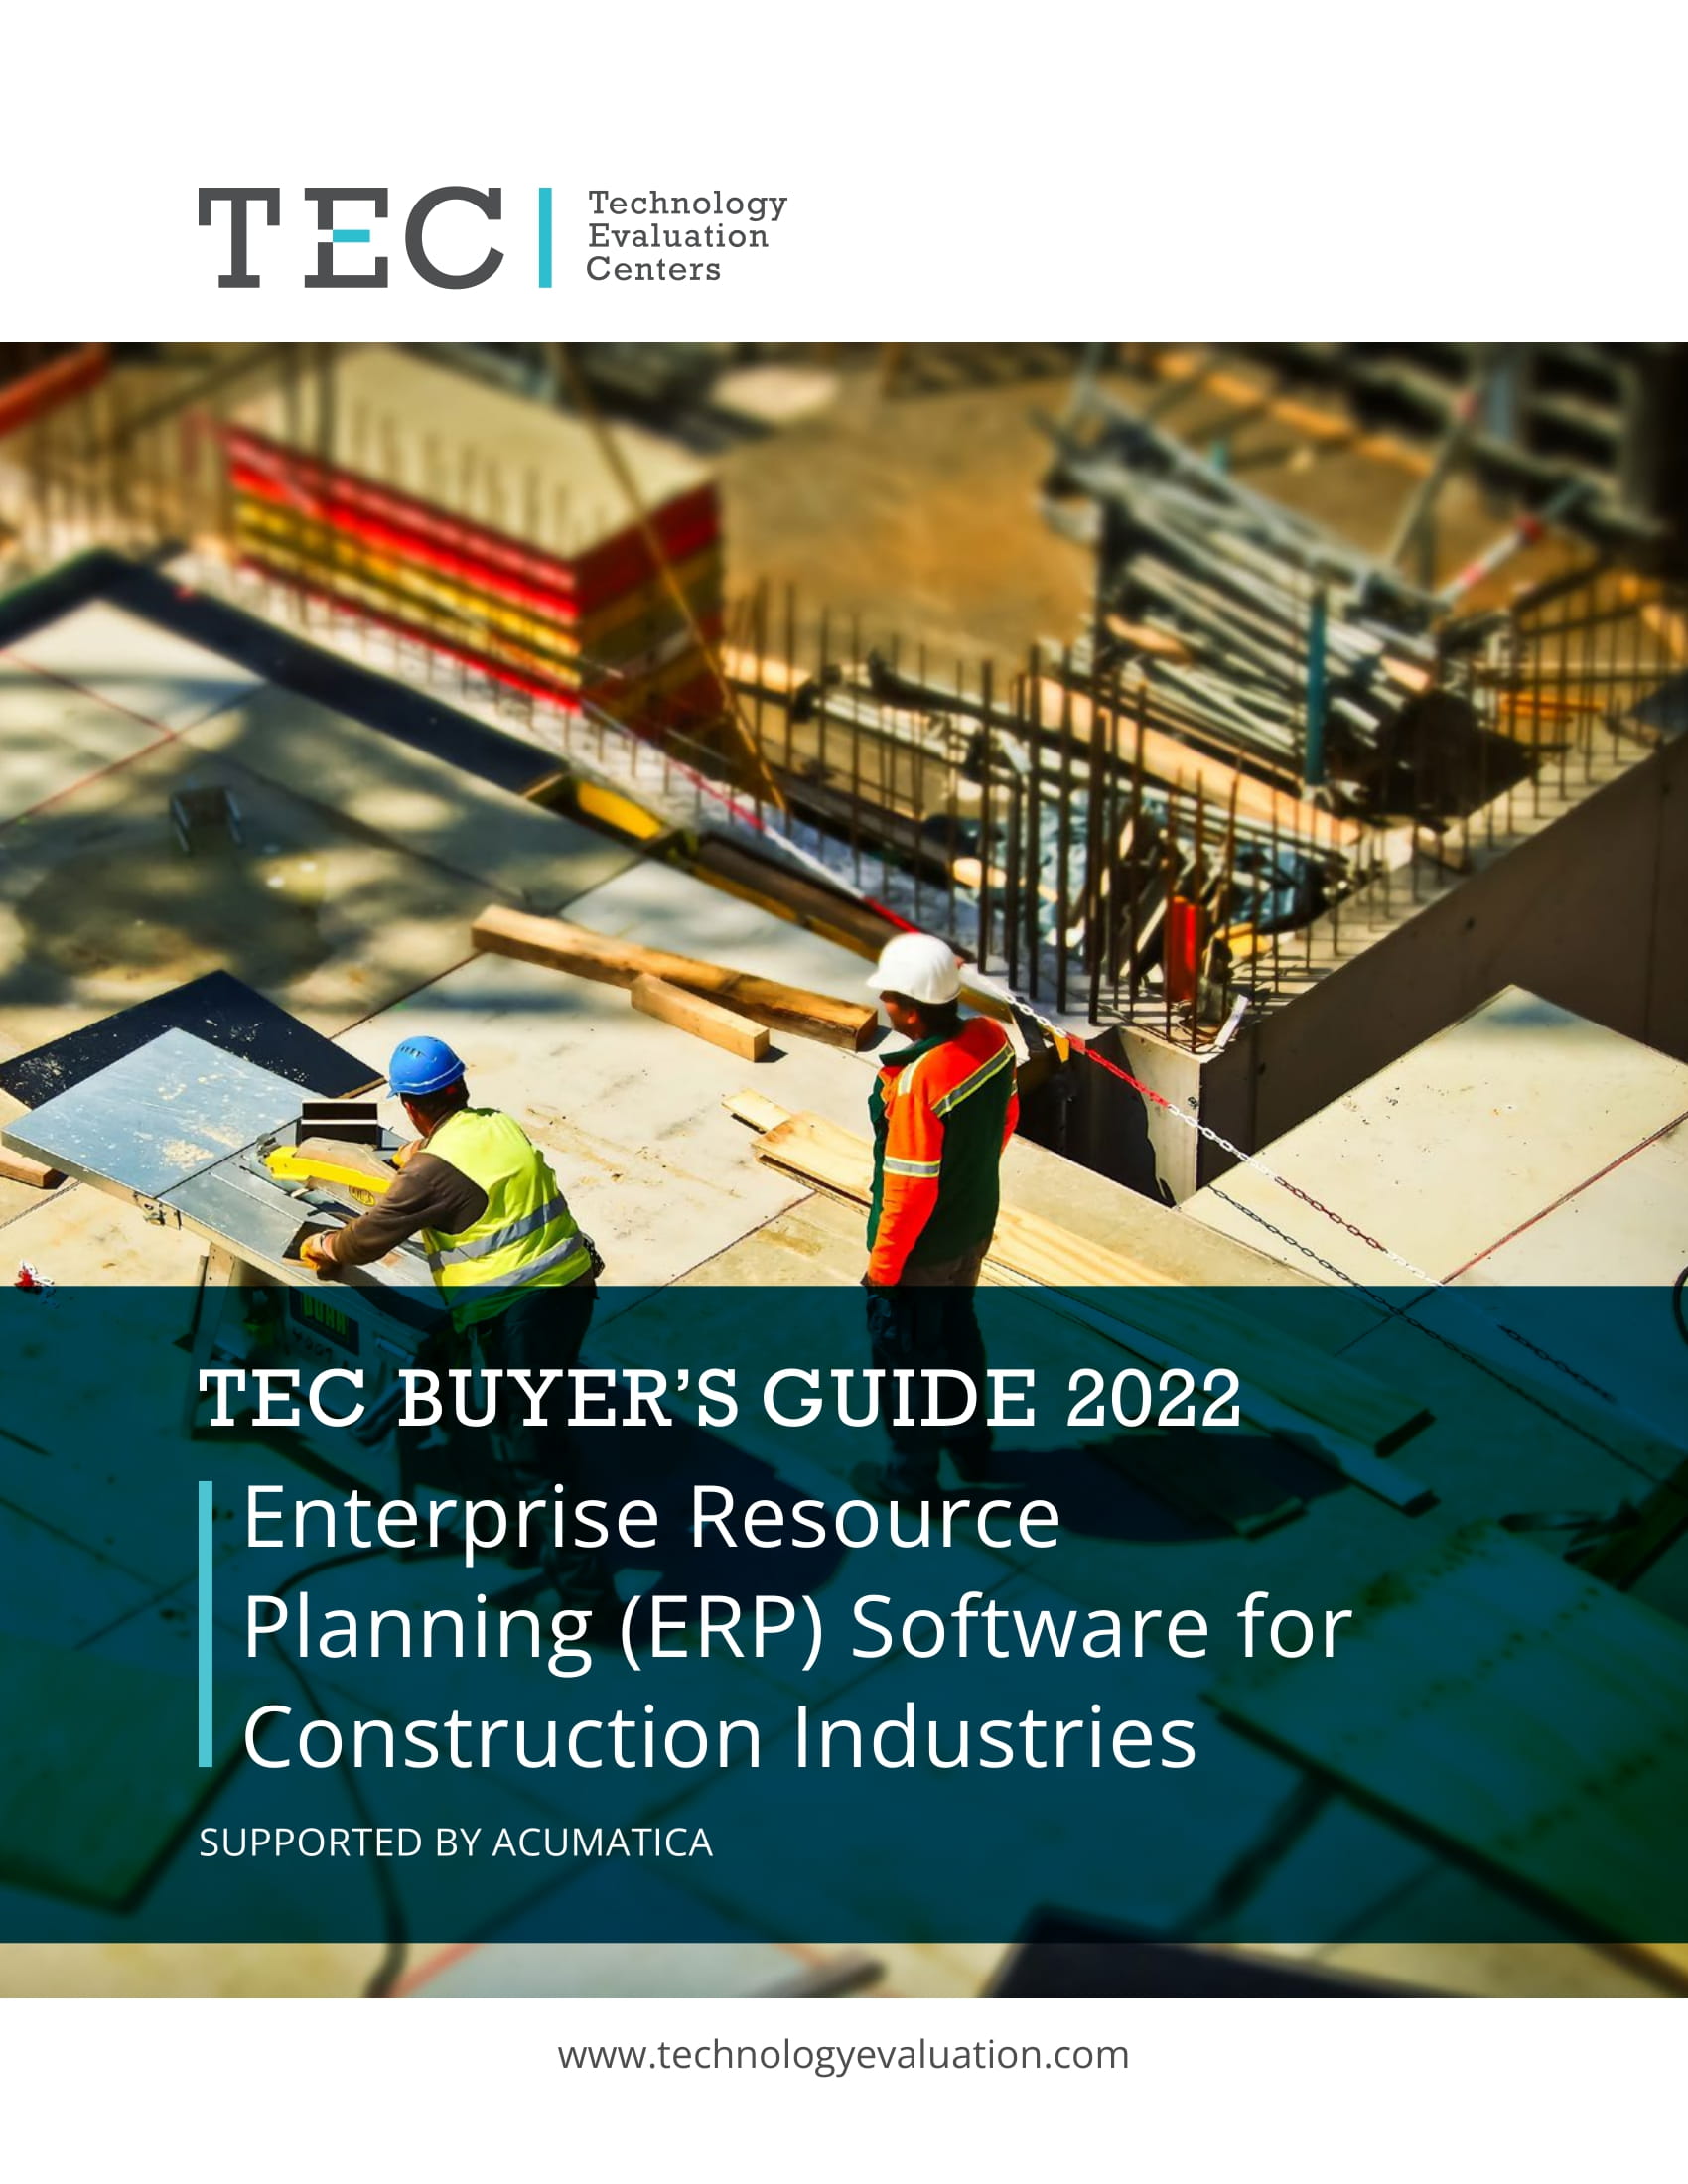 TEC 2021 ERP Software for Construction Industries Buyer’s Guide